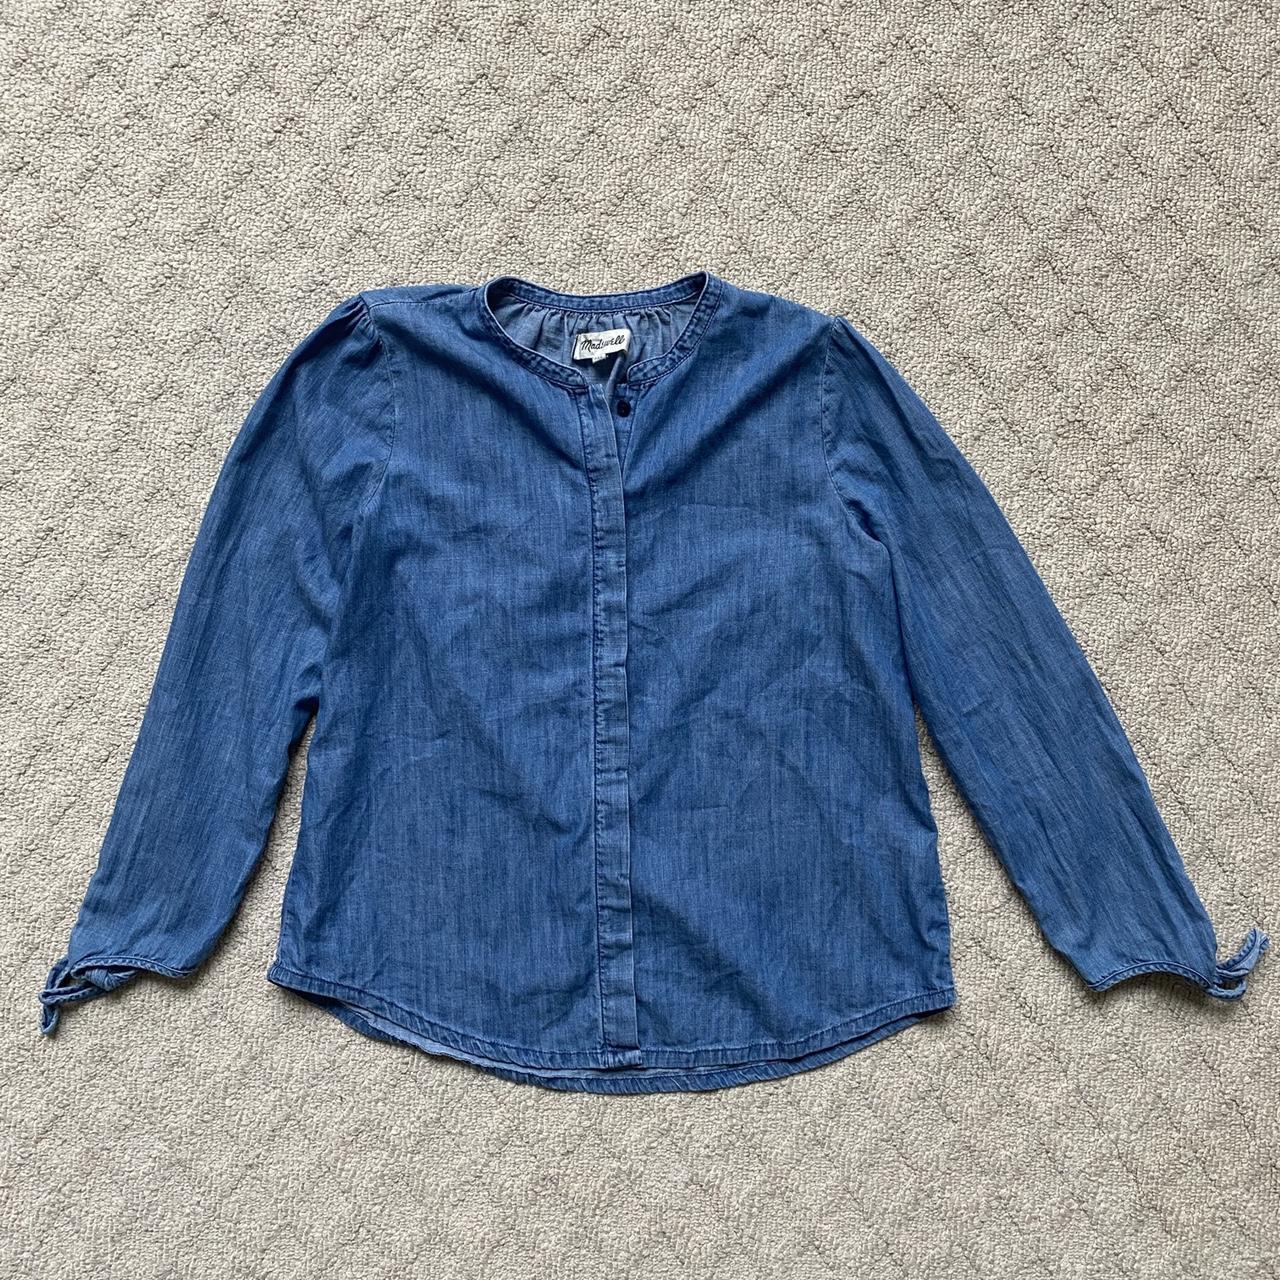 Style & Co. | Tops | Denim Tie Up Button Up Shirt | Poshmark